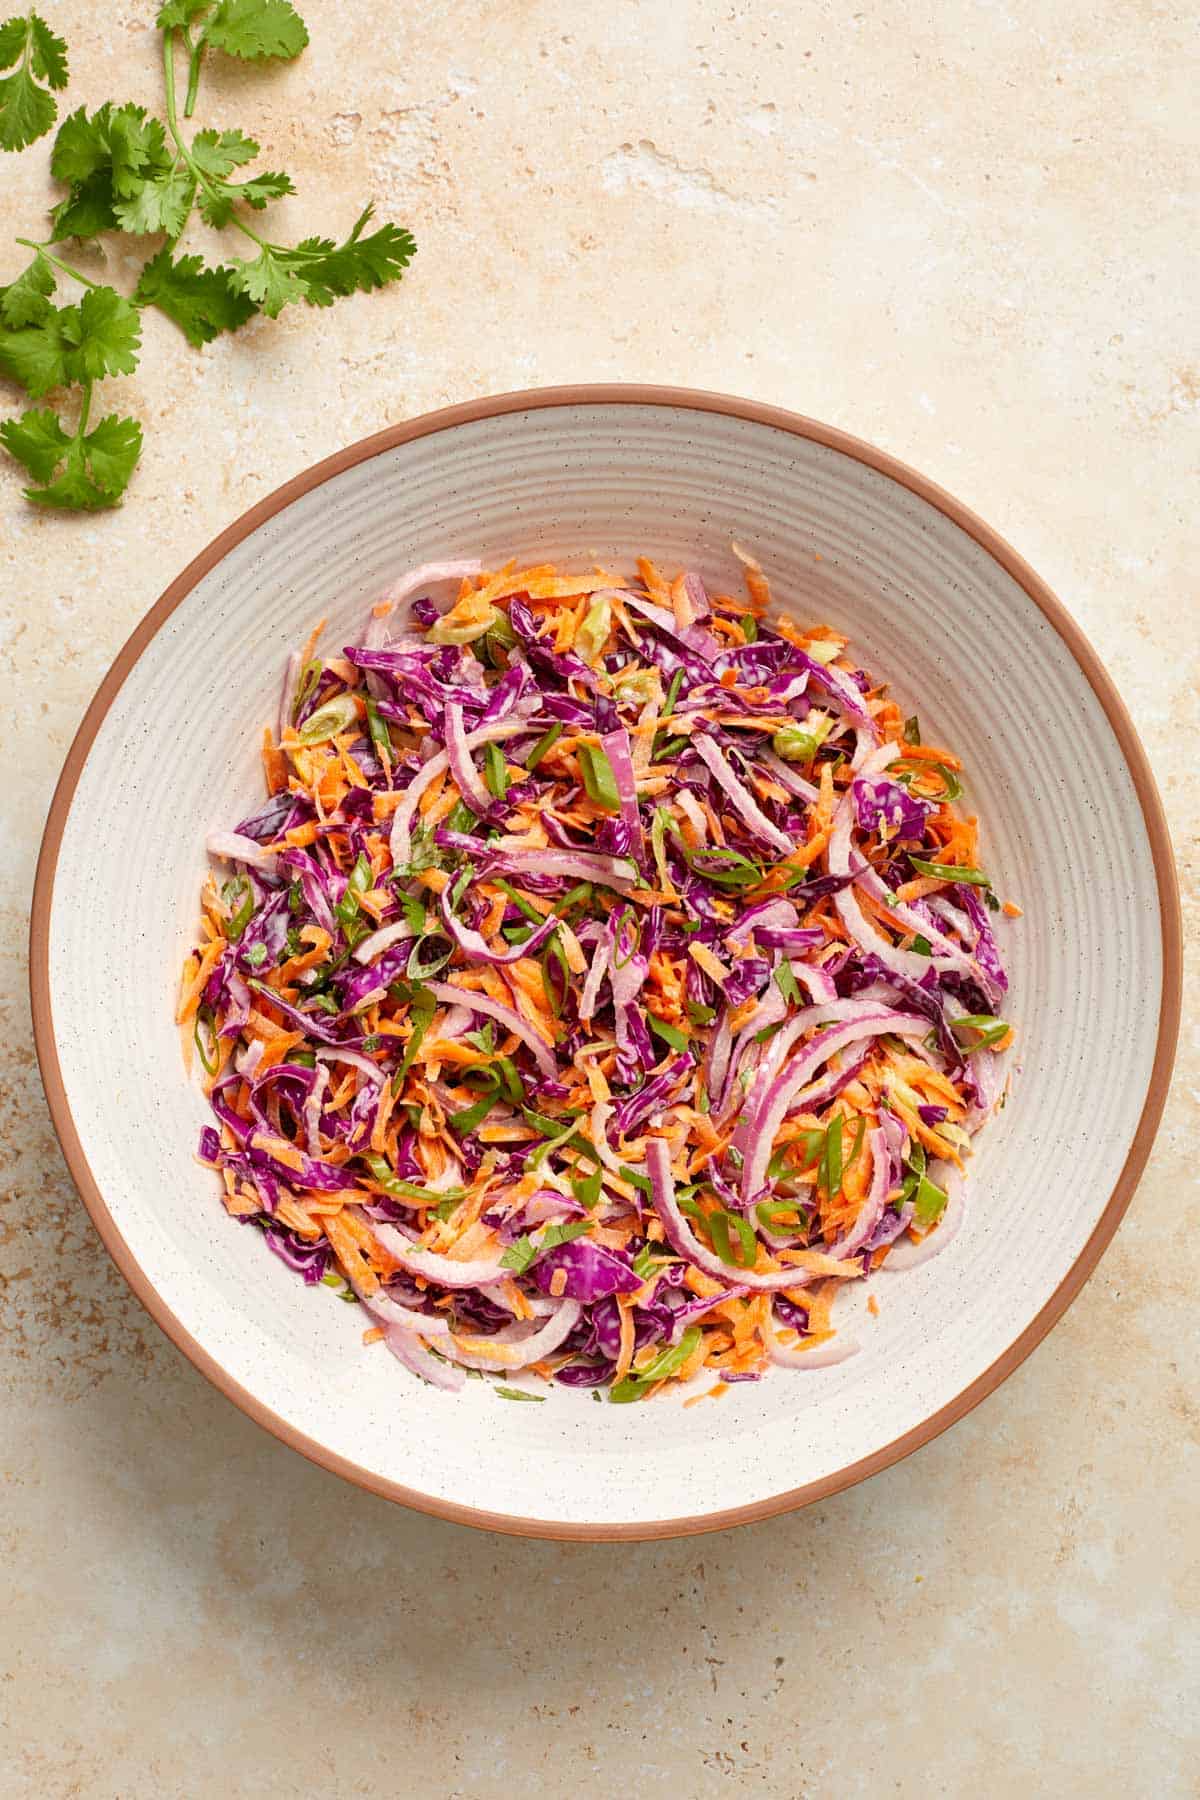 Overhead view of a bowl of purple cabbage slaw with some cilantro on the side.